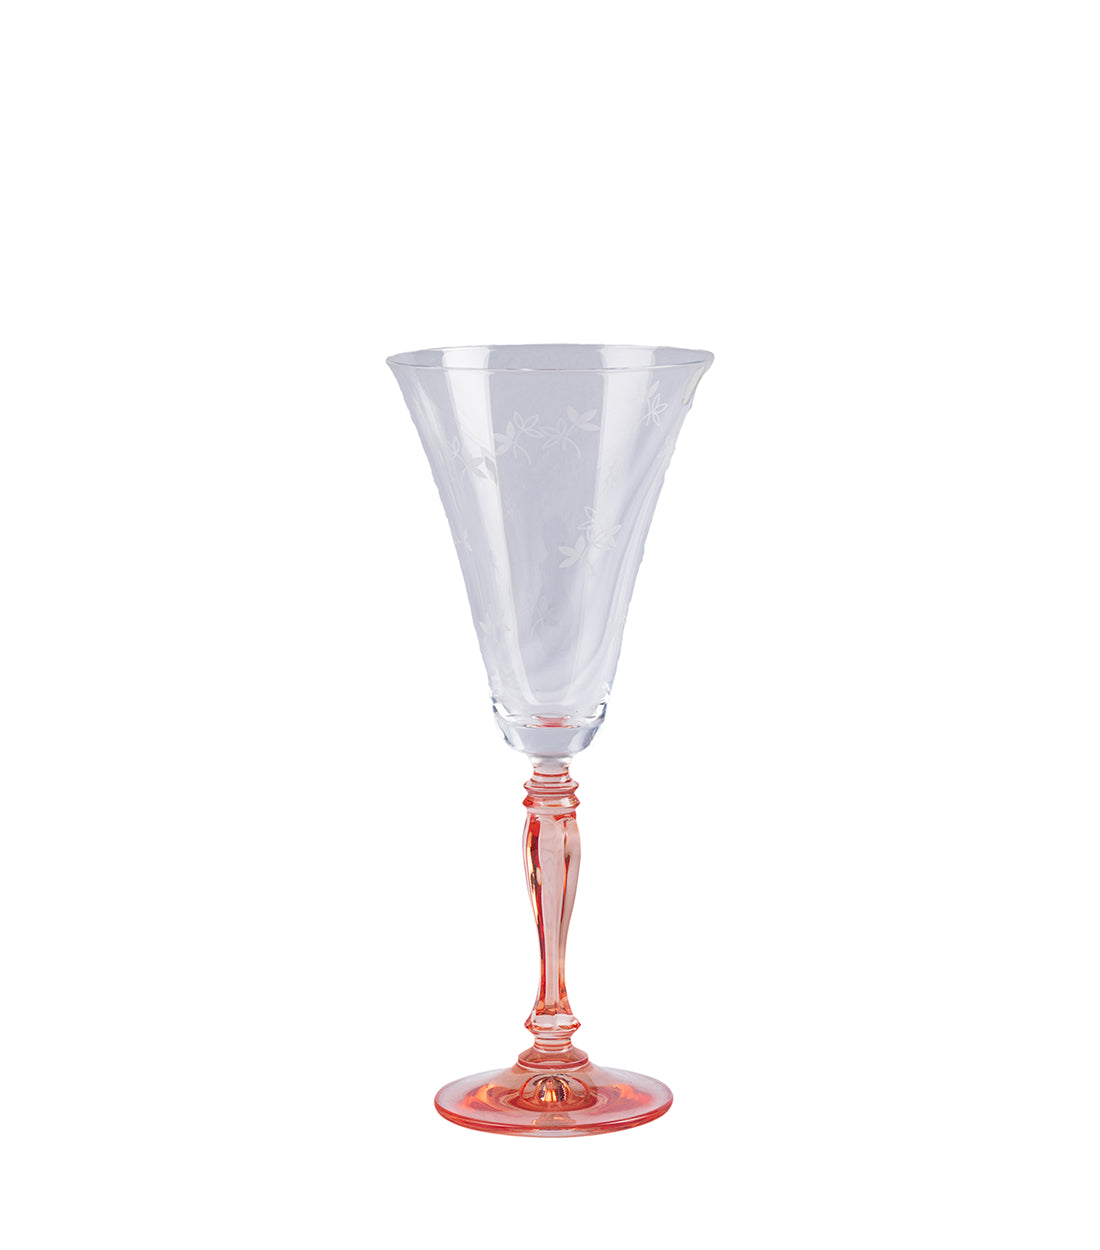 CAESAR CRYSTAL BOHEMIAE - Bell Shaped Crystal Cut Glass in Orange Color - Bespoke Cocktail Glass with Fine Detailing.